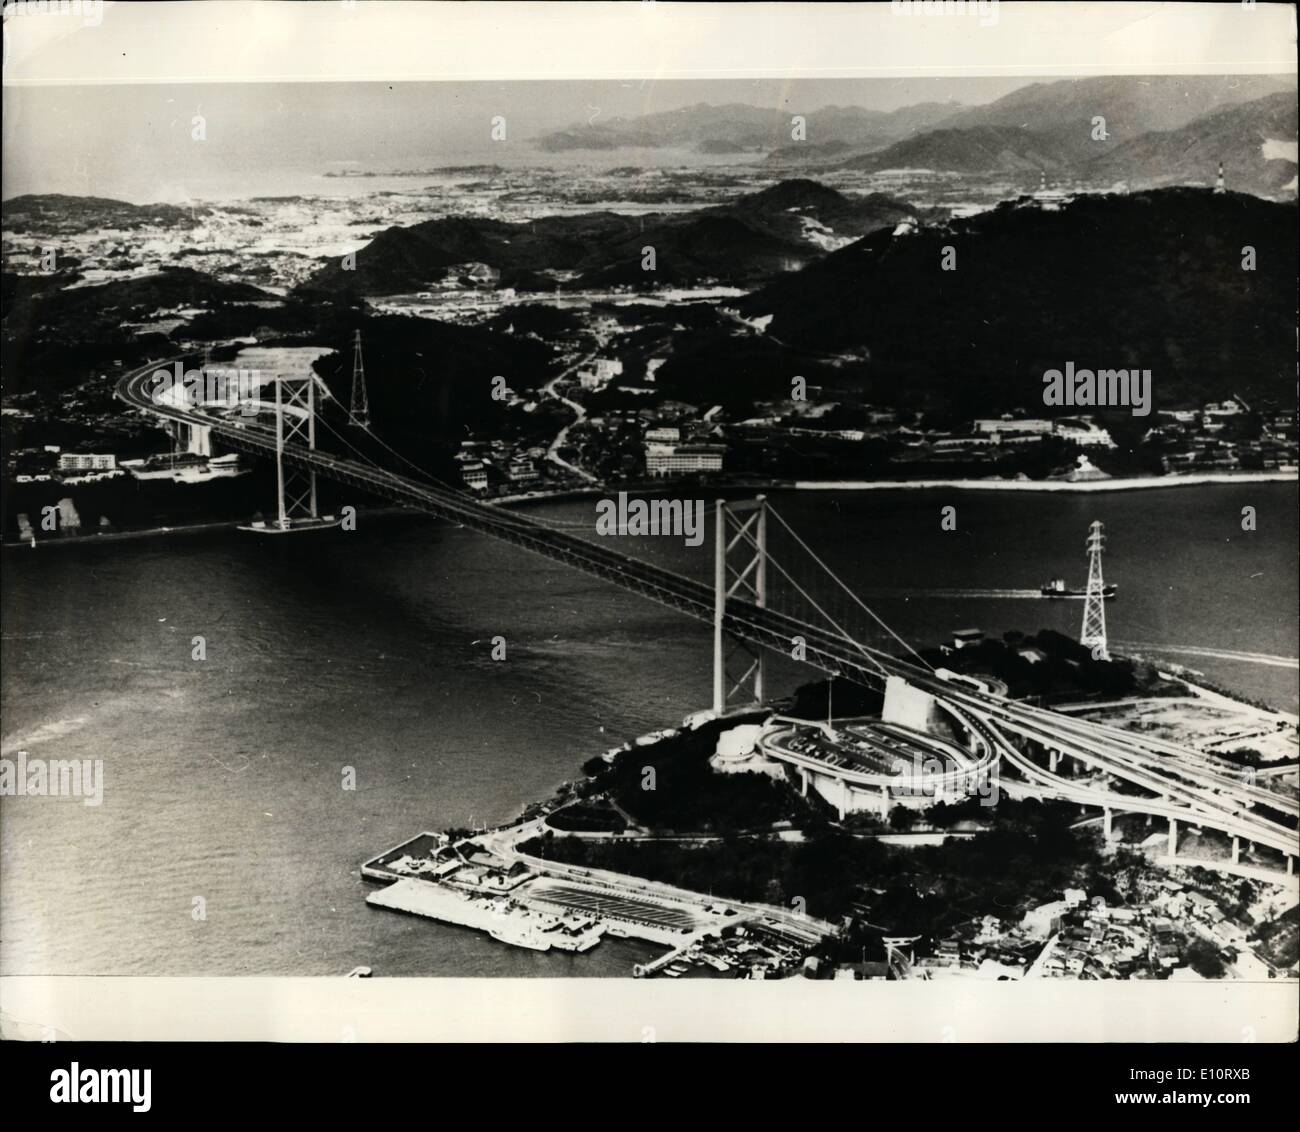 Jan. 01, 1974 - Largest Bridge, the longest span in the Orient, which connects Japan's Honshu mainland and Kyusu Island Island is now completed; The bridge, 1,068 meters long, 26 meters Long, 26 meters wide with six traffic lanes is 141 meters high. It is also the 10th longest suspension bridge in the world. Photo Shows View of the Kanmon Bridge, Japan, which has just been completed. Stock Photo